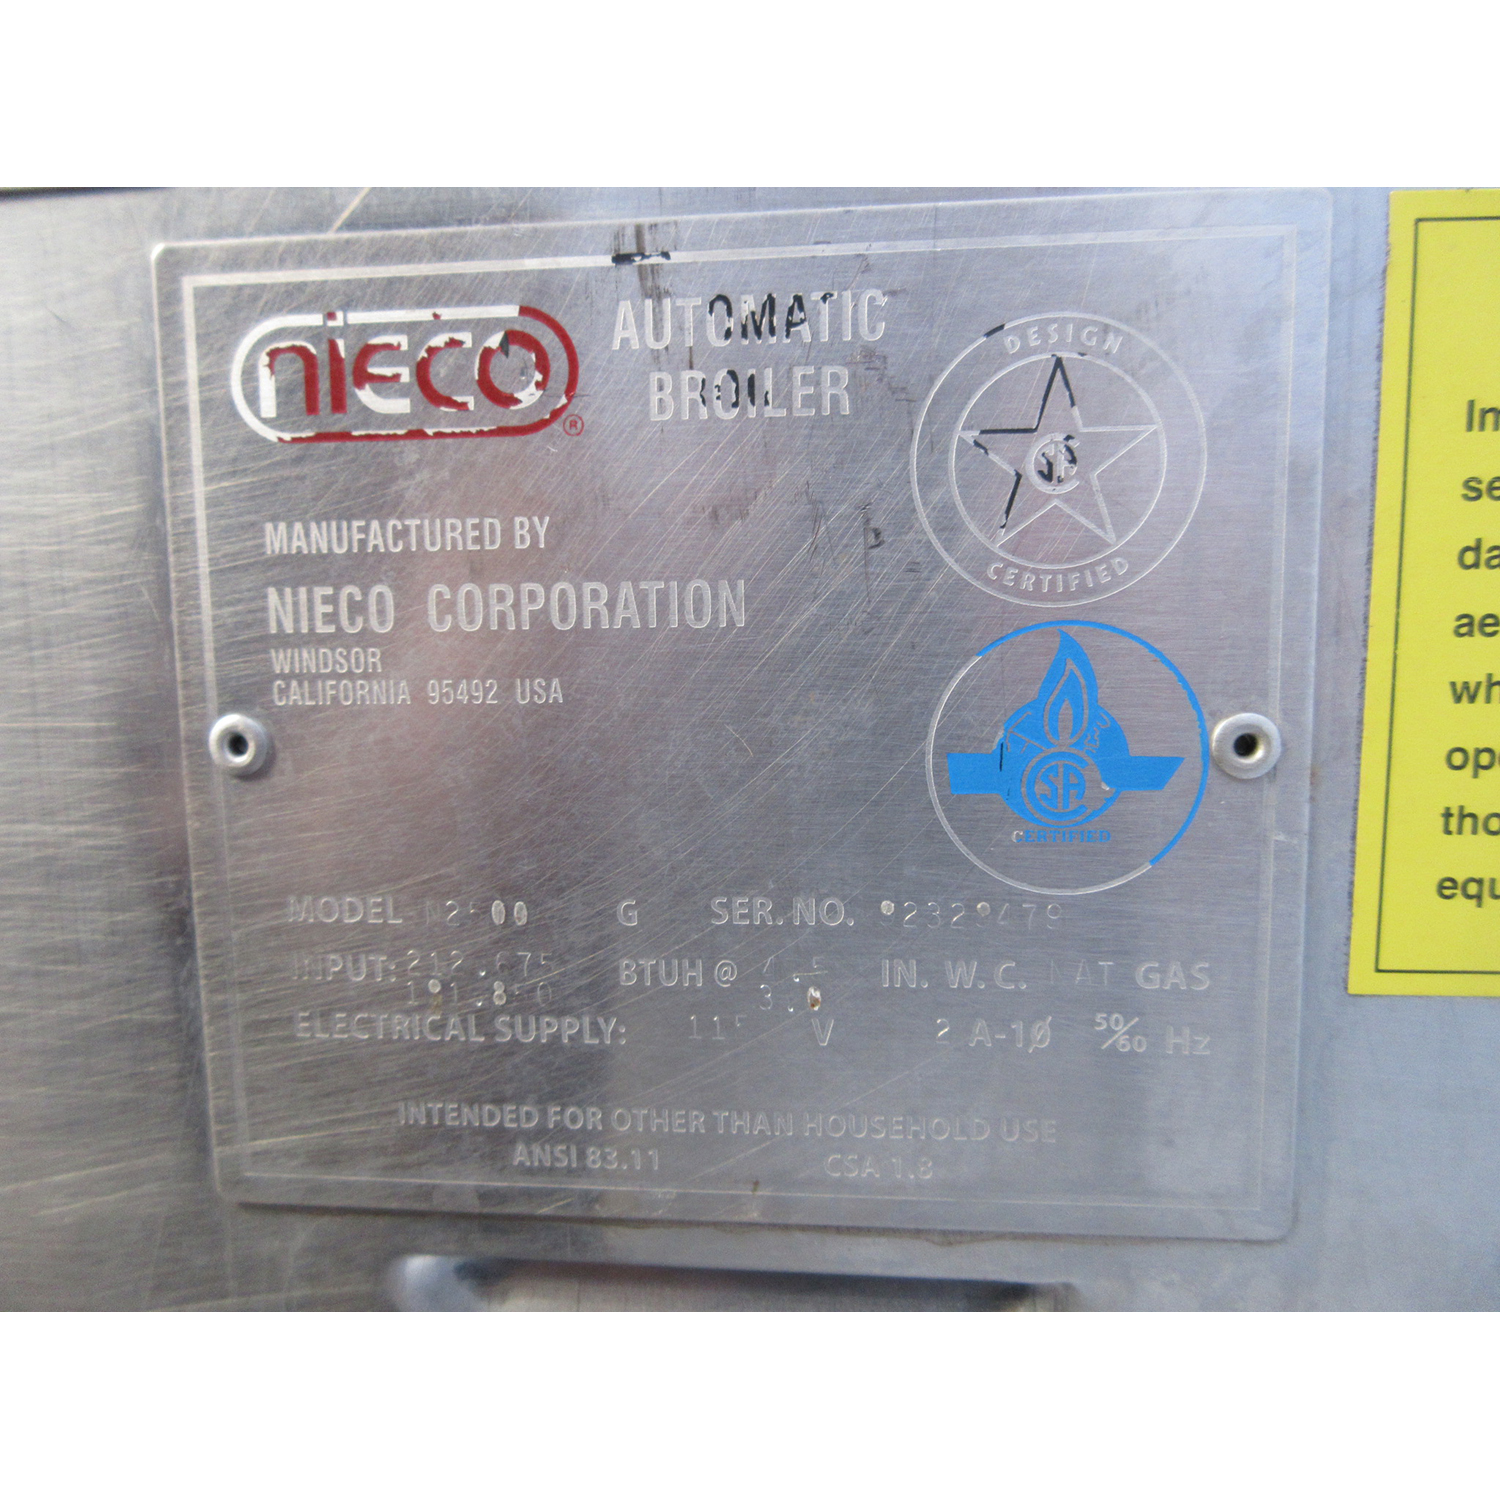 Nieco N2500 Automatic Conveyor Broiler, Used Excellent Condition image 8